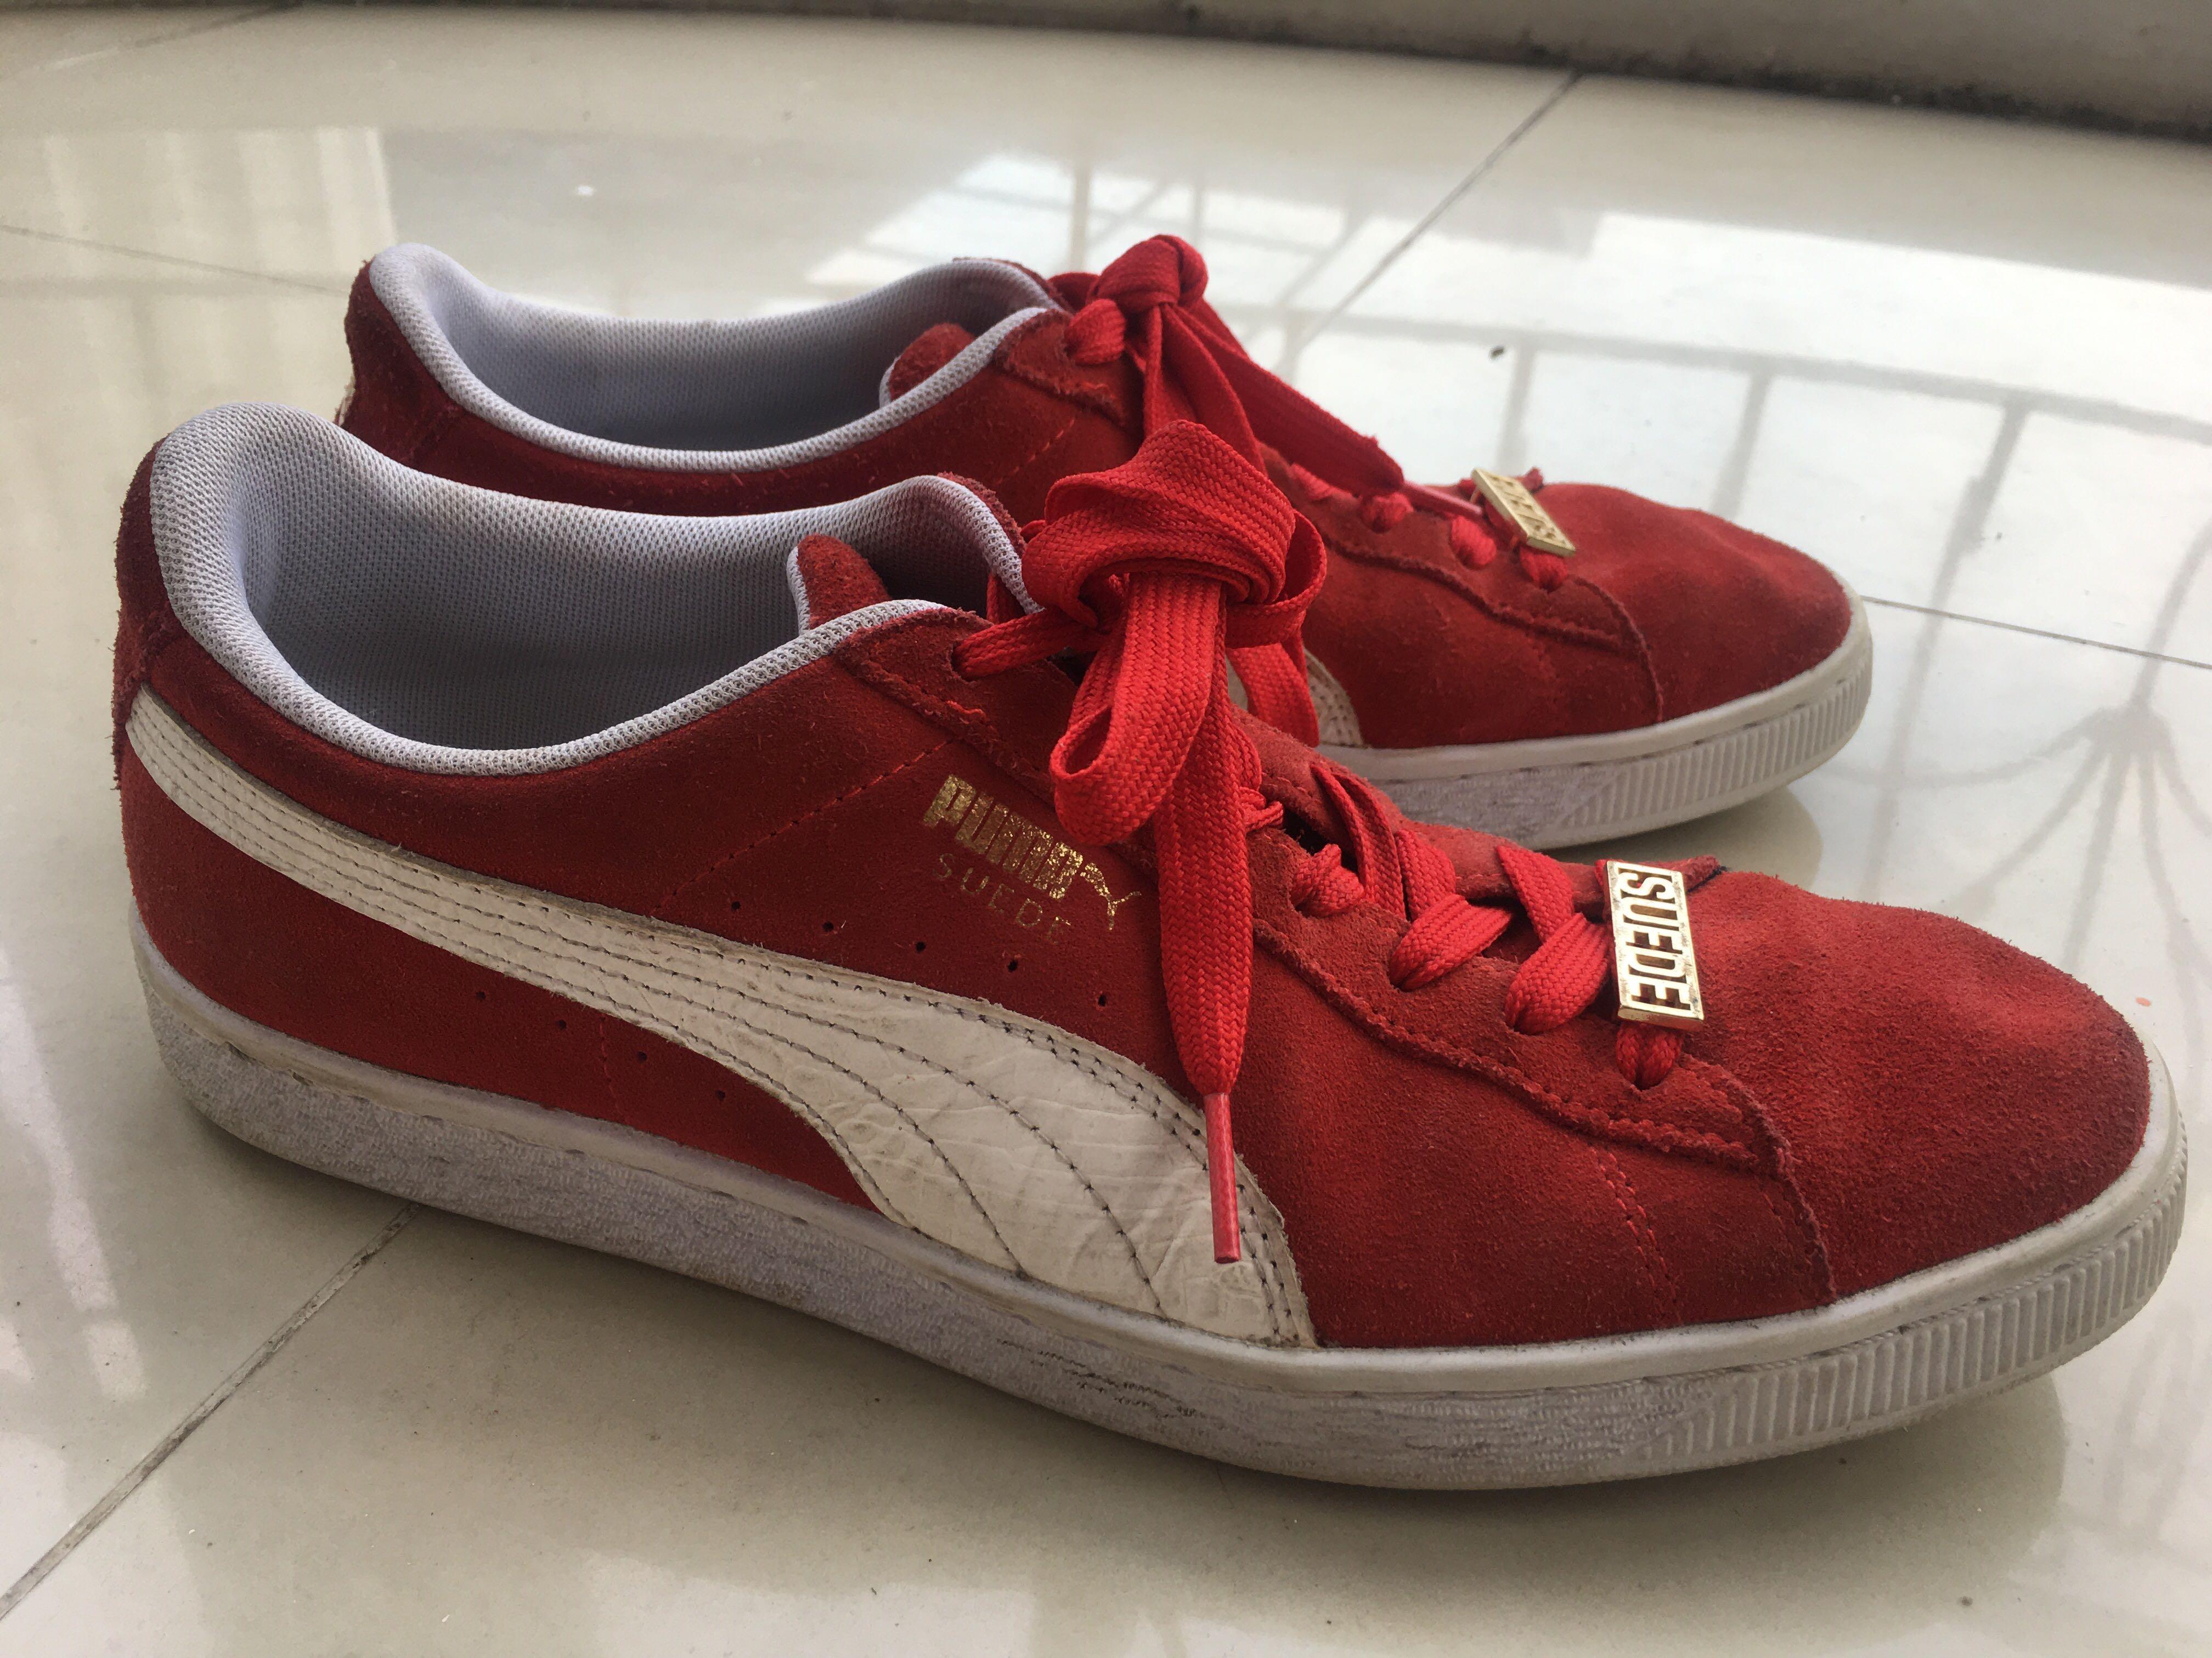 red and white suede pumas